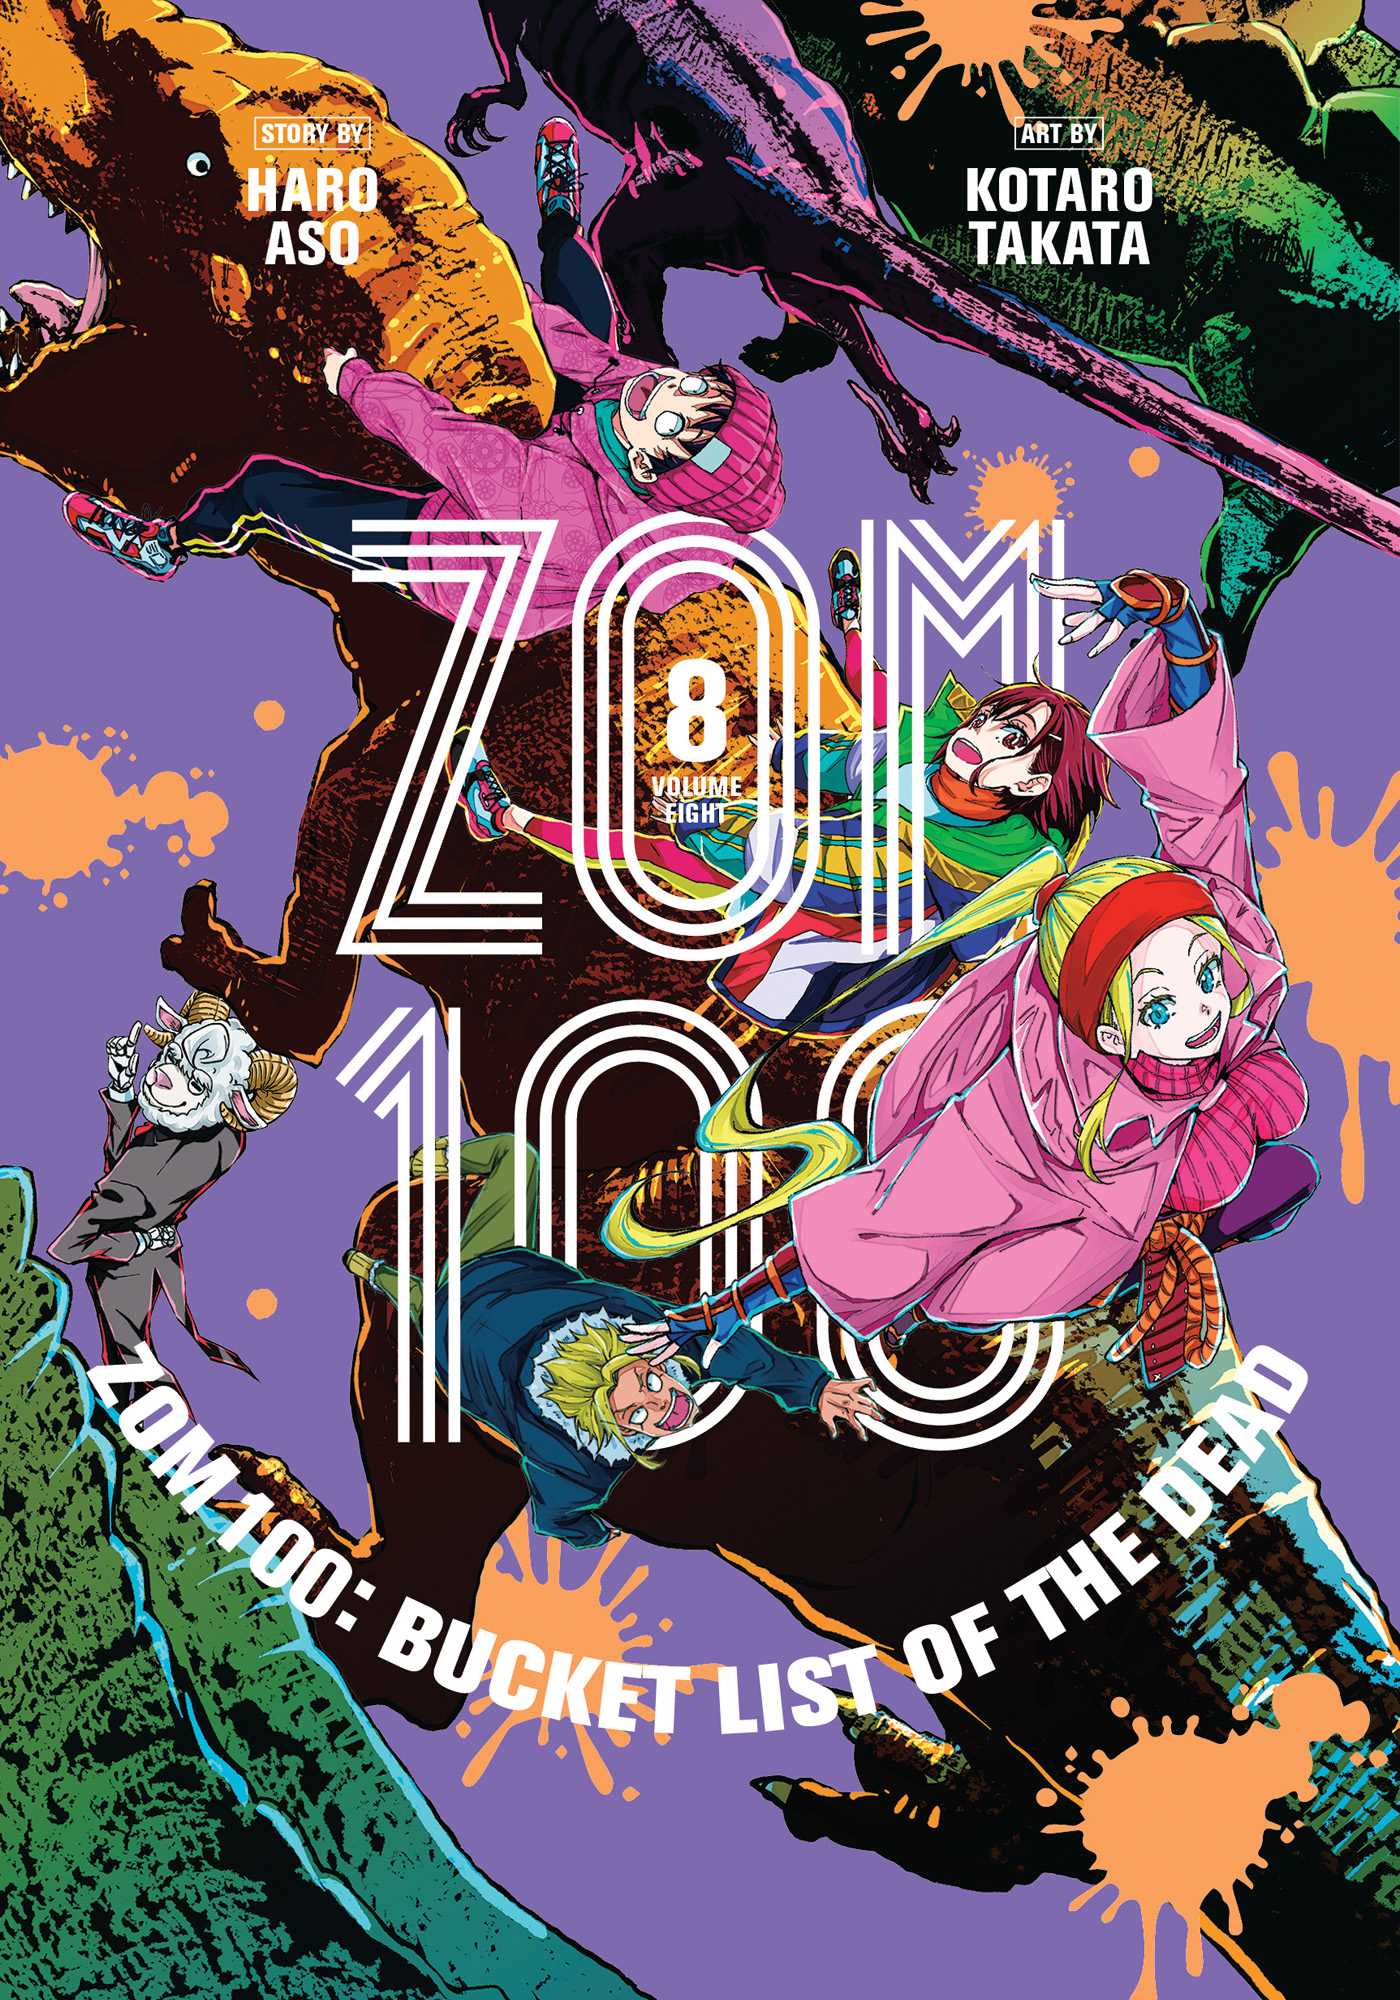 Zom 100: Bucket List of the Dead, Vol. 8. Book by Haro Aso, Kotaro Takata. Official Publisher Page. Simon & Schuster